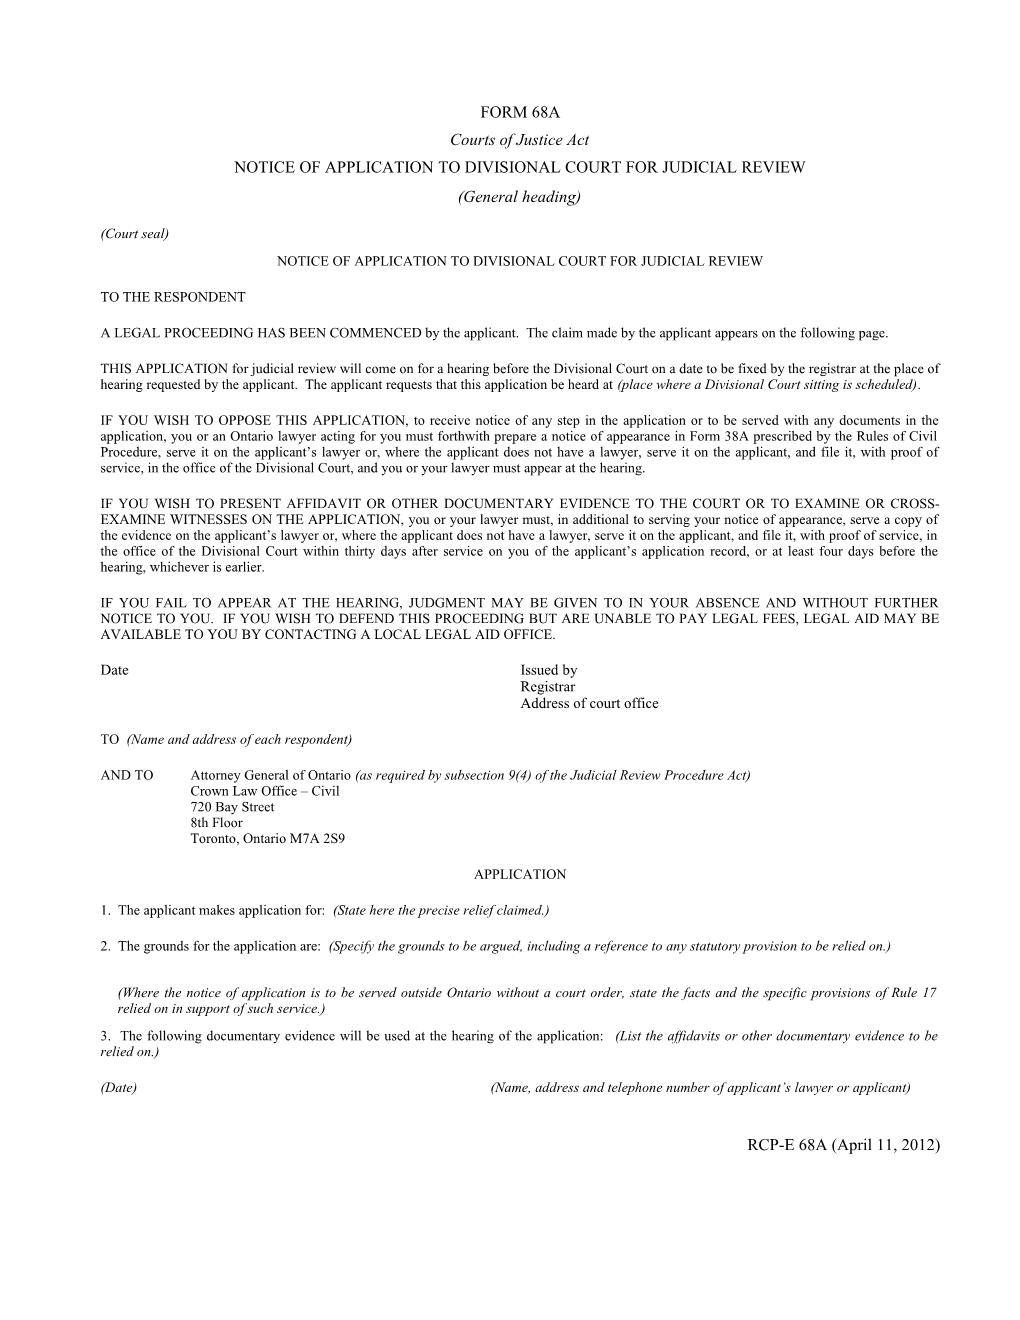 Form 68A Notice of Application to Divisional Court for Judicial Review